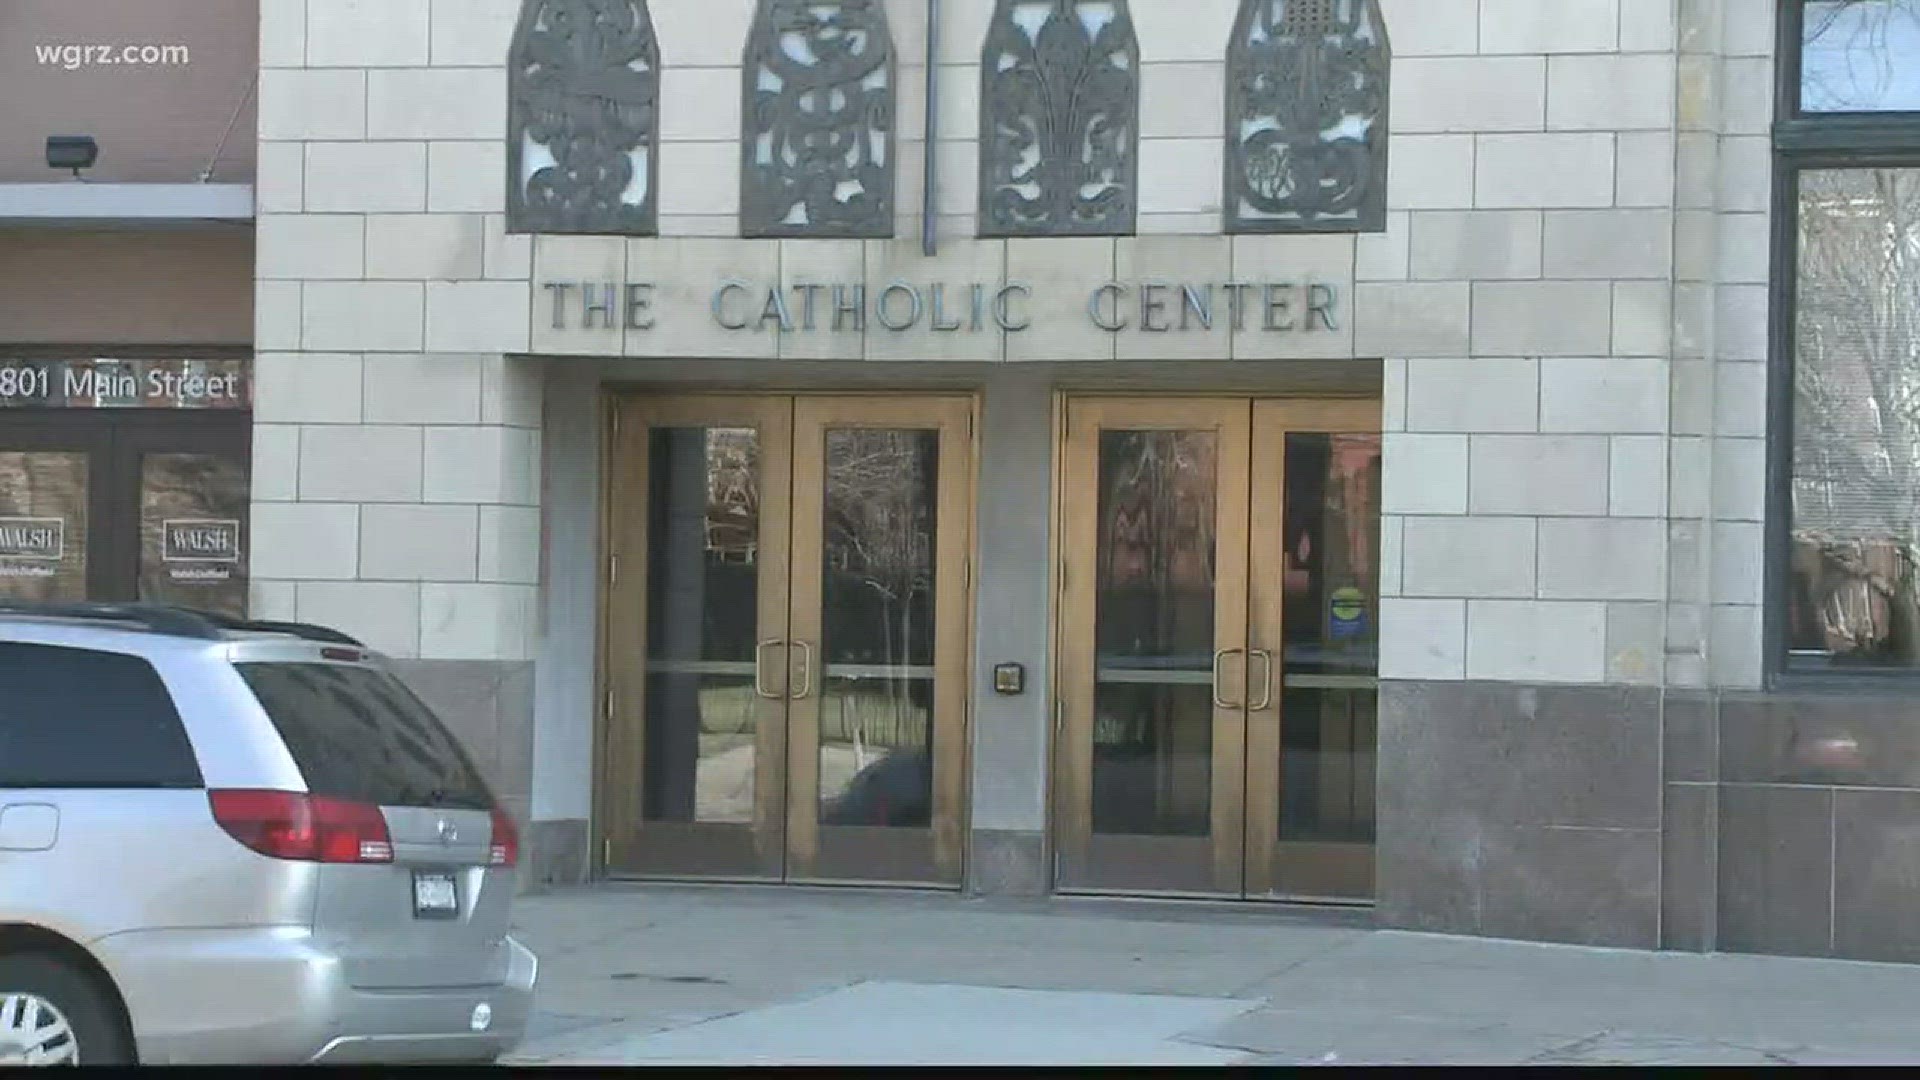 A local, retired priest has admitted to sexually abusing dozens of boys.